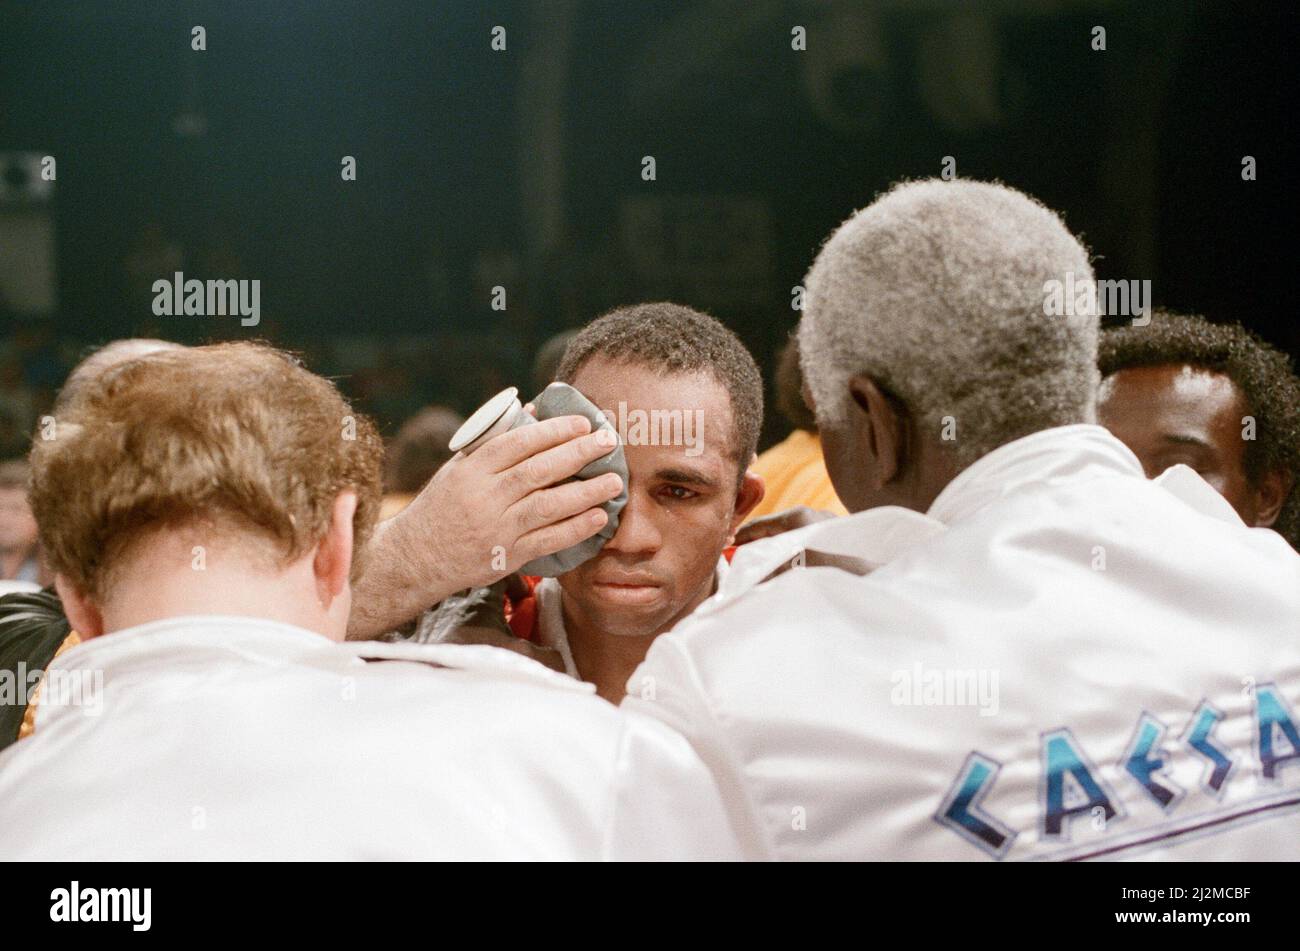 Lloyd Honeyghan vs Marlon Starling for the WBC Welterweight title. Caesars Palace, Las Vegas, Nevada, USA. Starling won by TKO in round nine to become new WBC welterweight champion.(Picture) Honeyghan with an ice pack on his swollen eye. 4th February 1989. Stock Photo